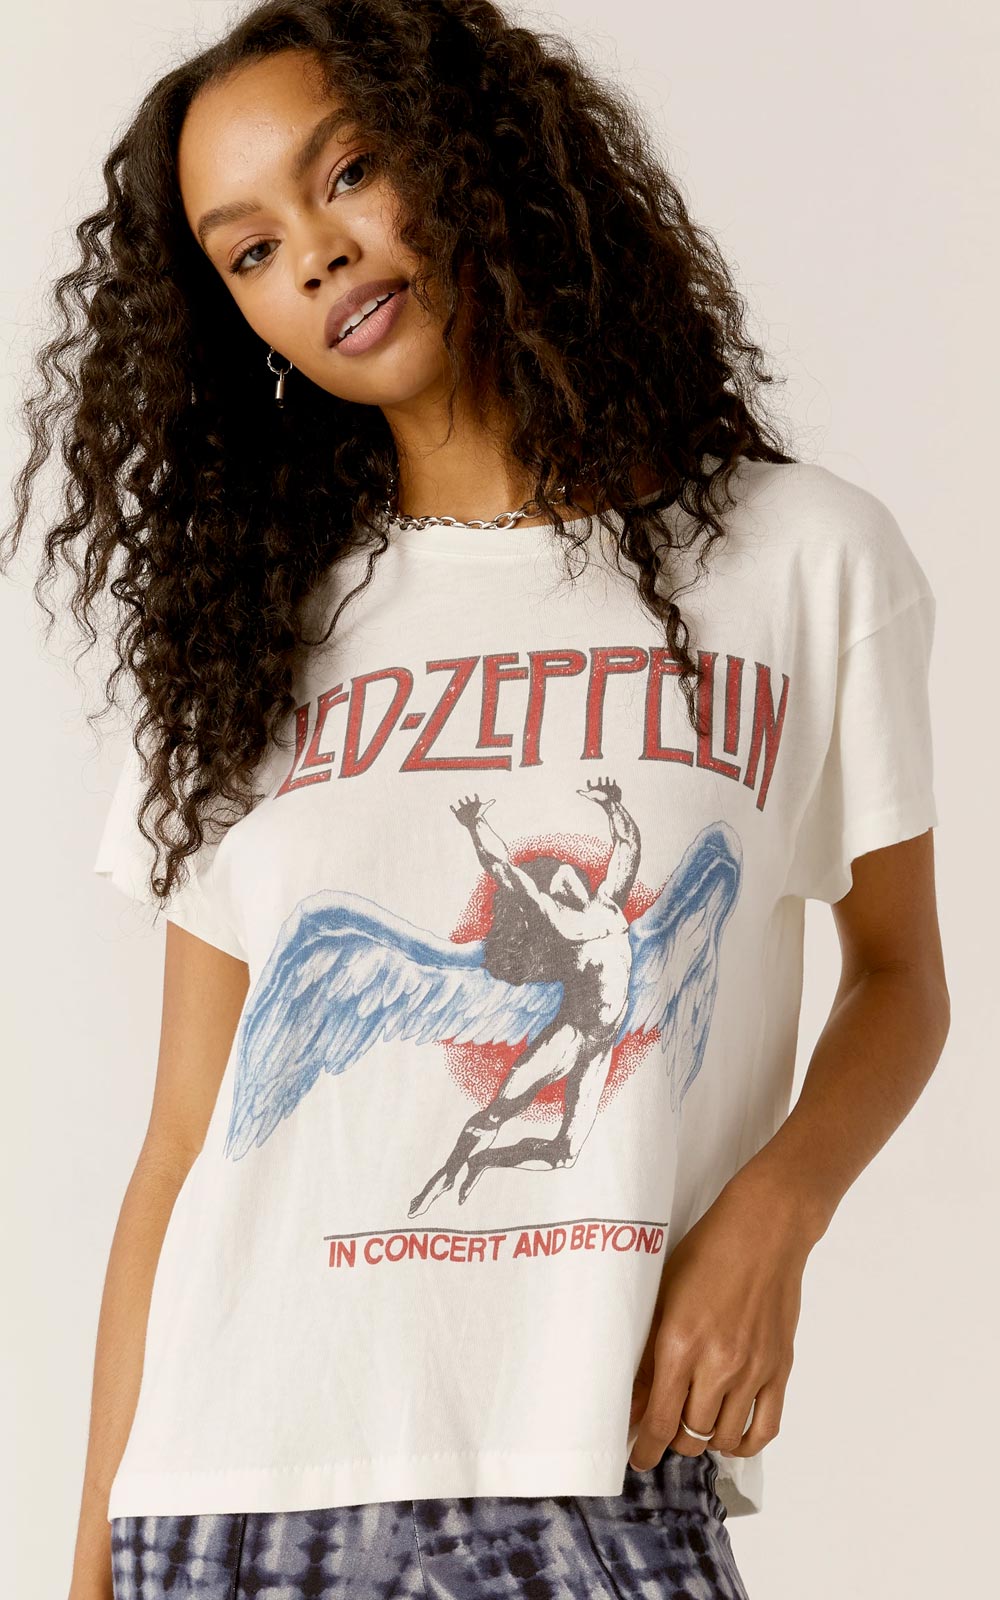 Led Zeppelin In Concert And Beyond Tour Tee